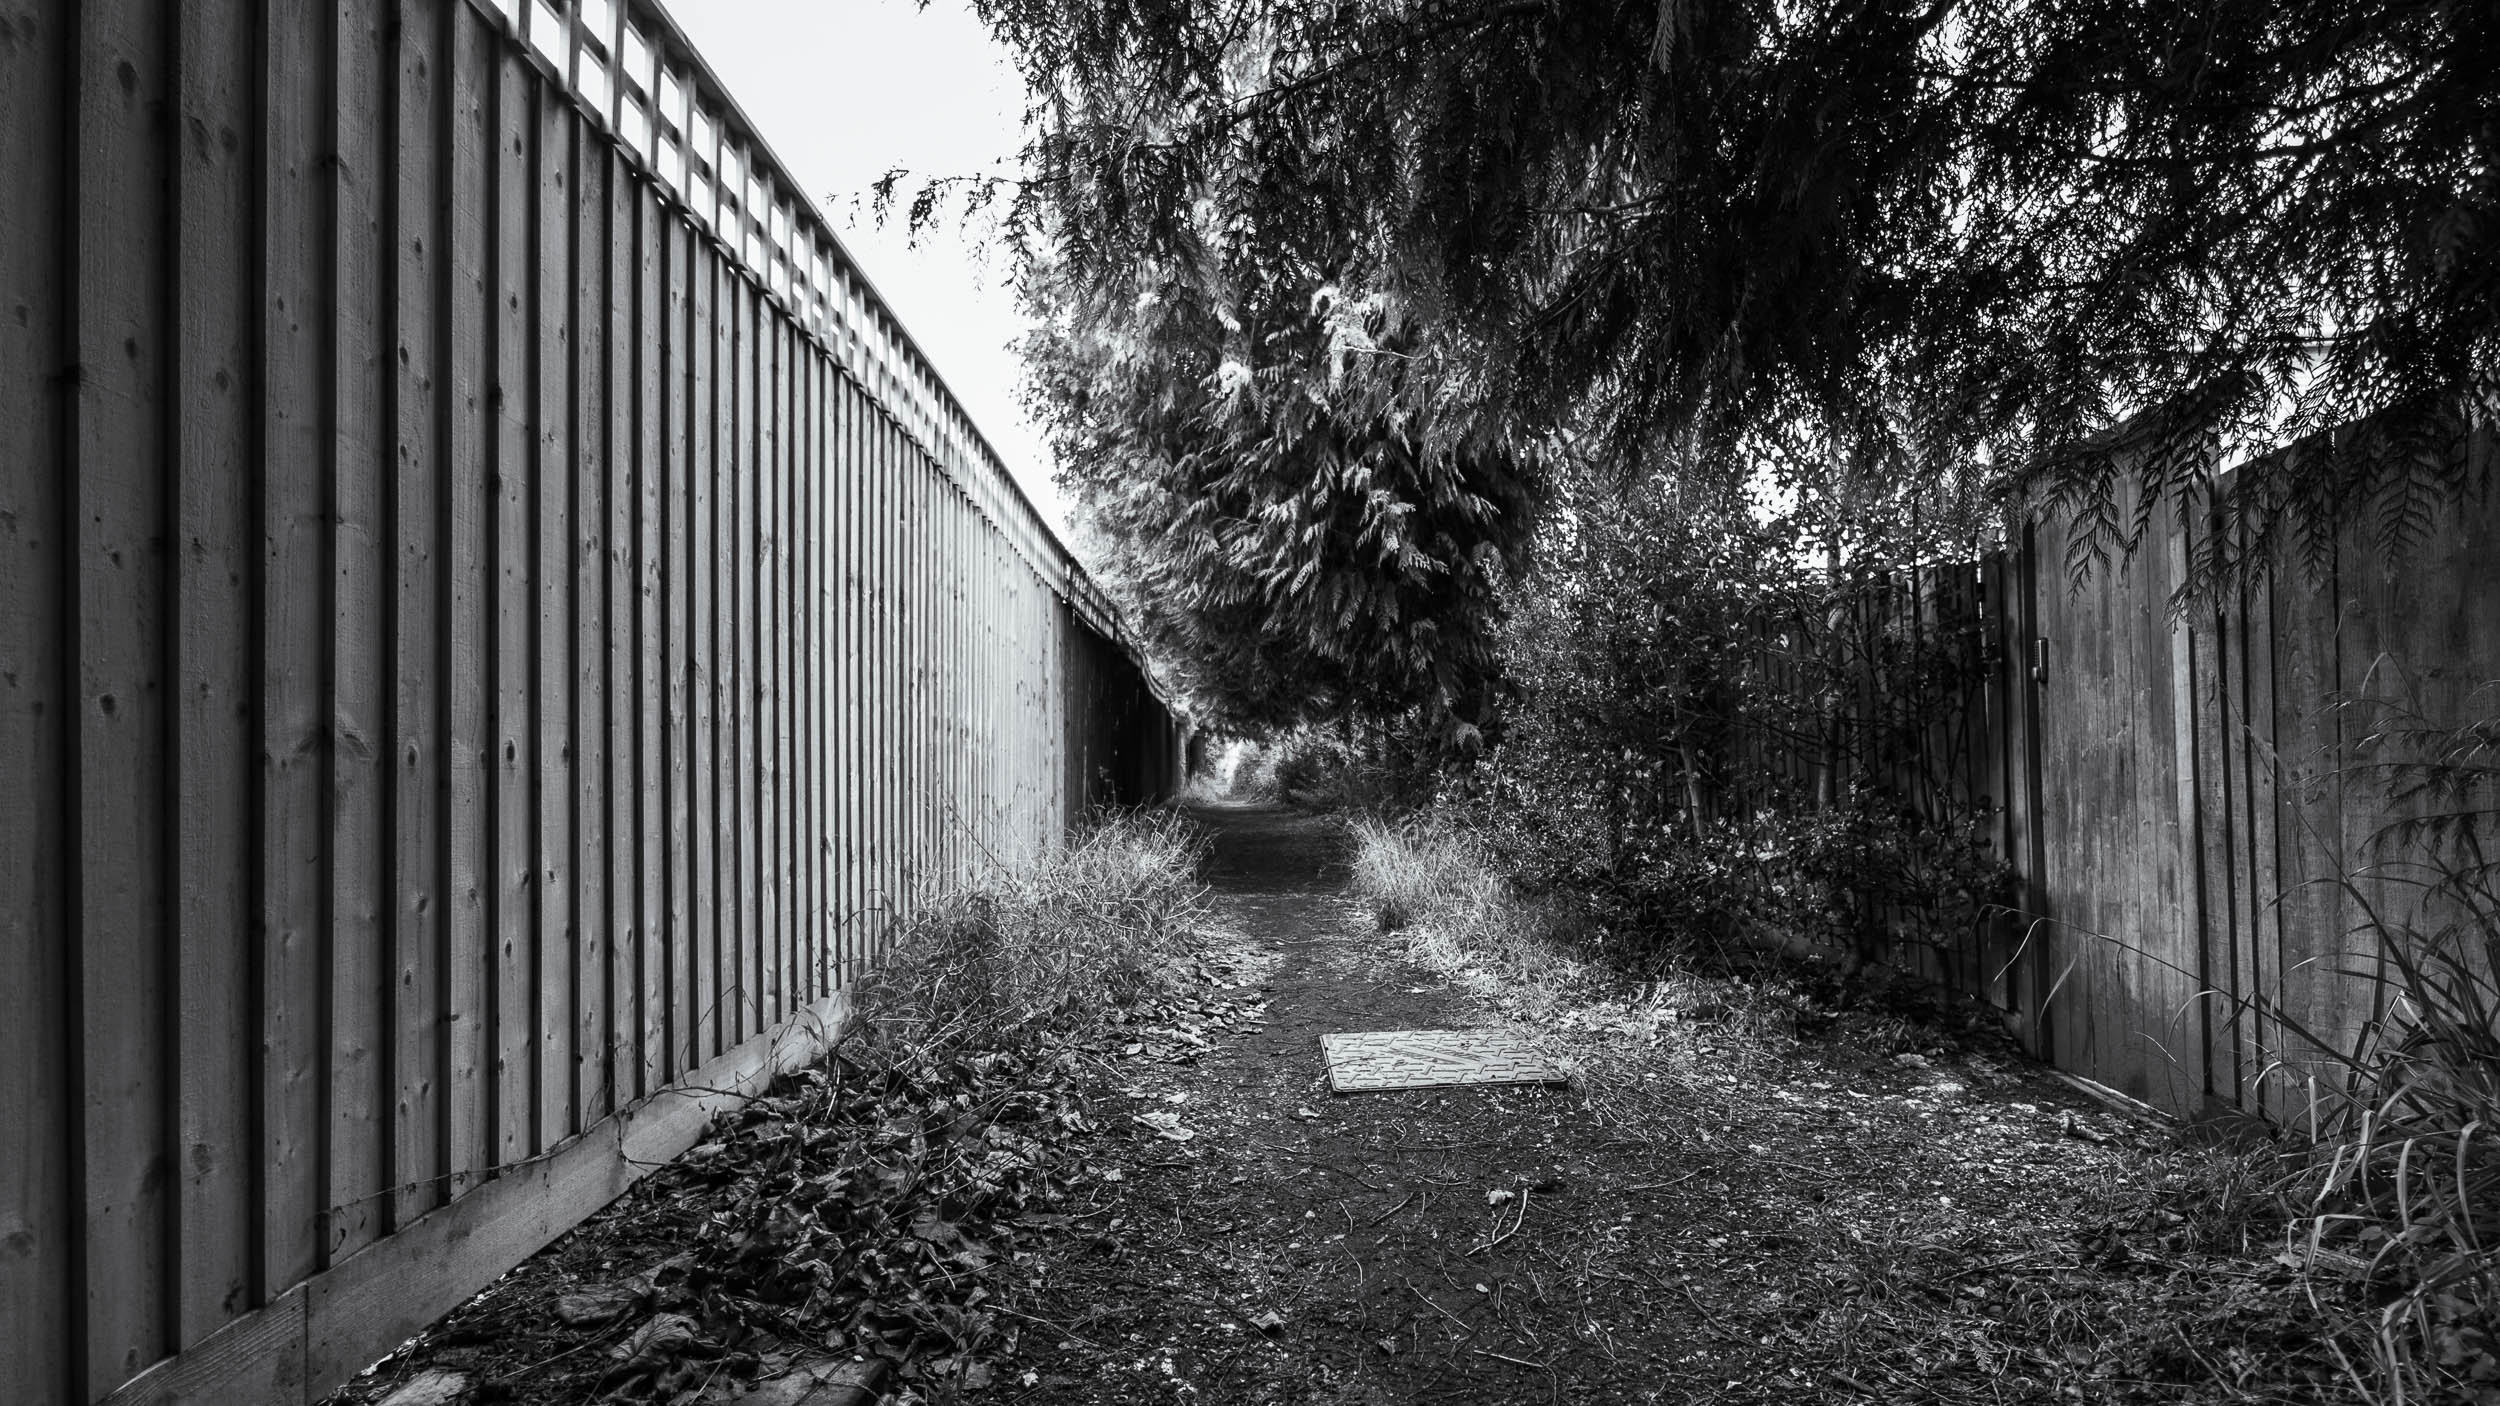 Black and white image of fence lined path overhung with trees and bushes.